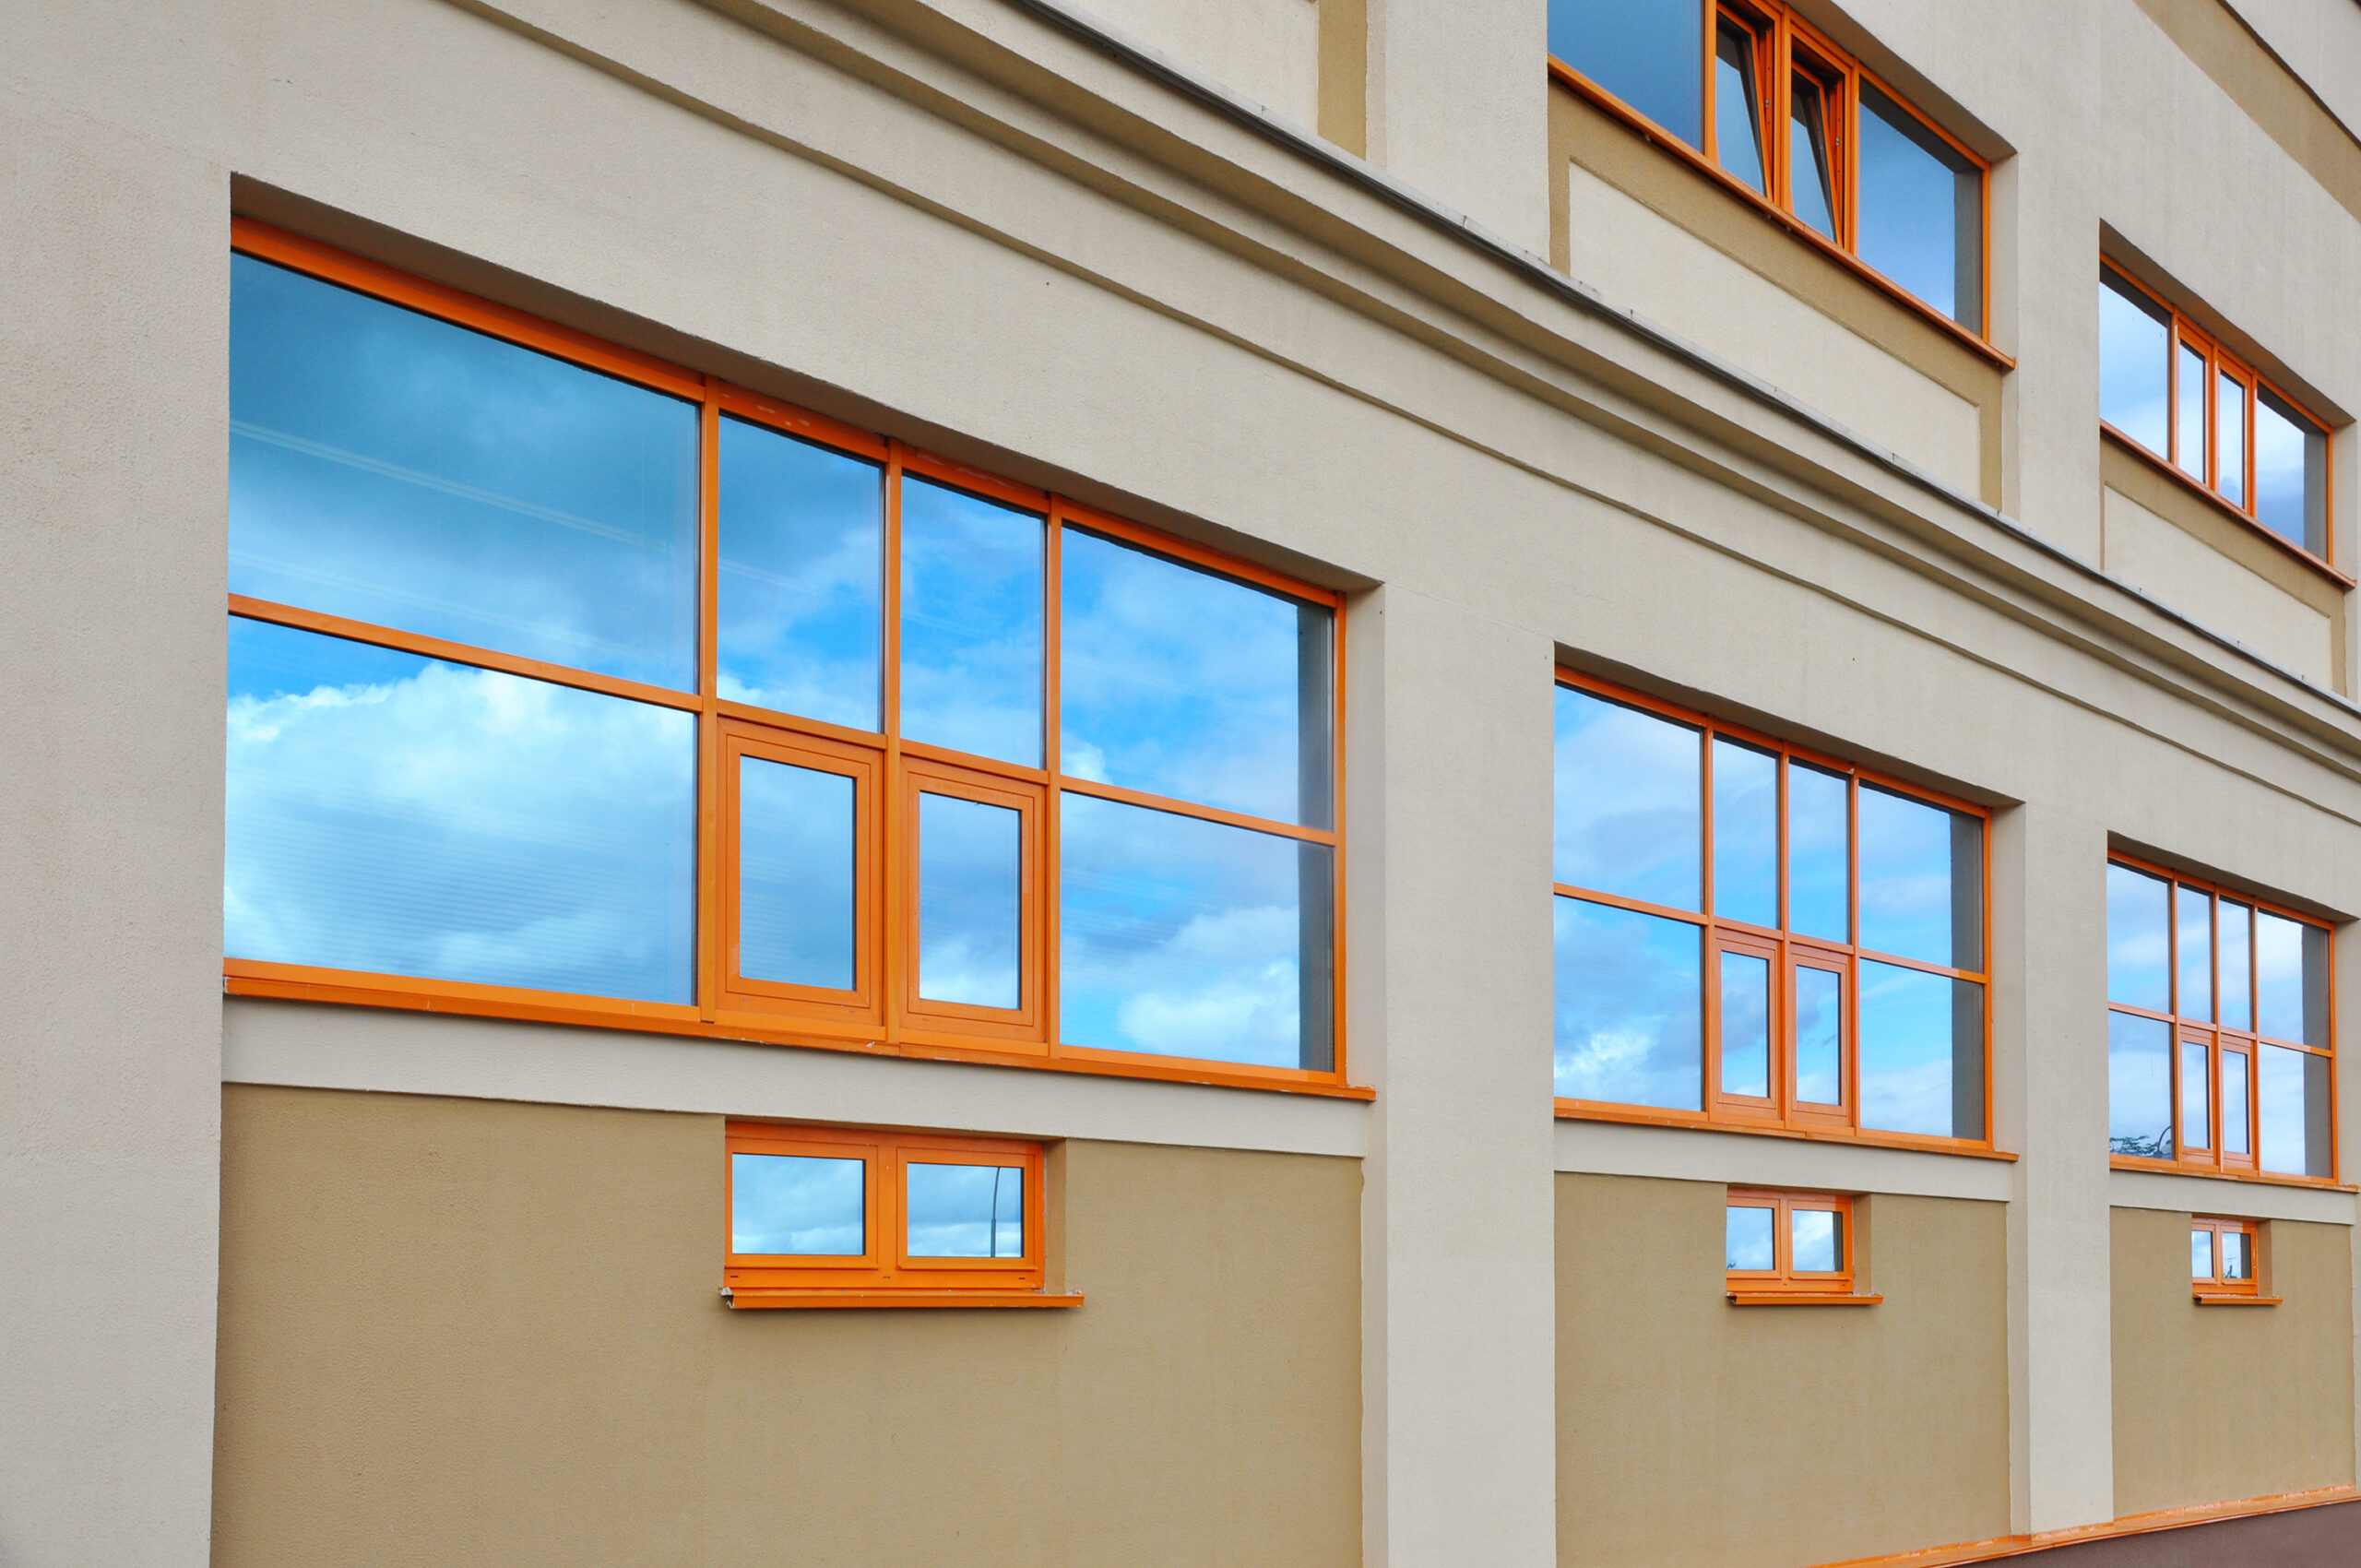 INSULATED GLASS UNITS -TYPES AND OPTIONS